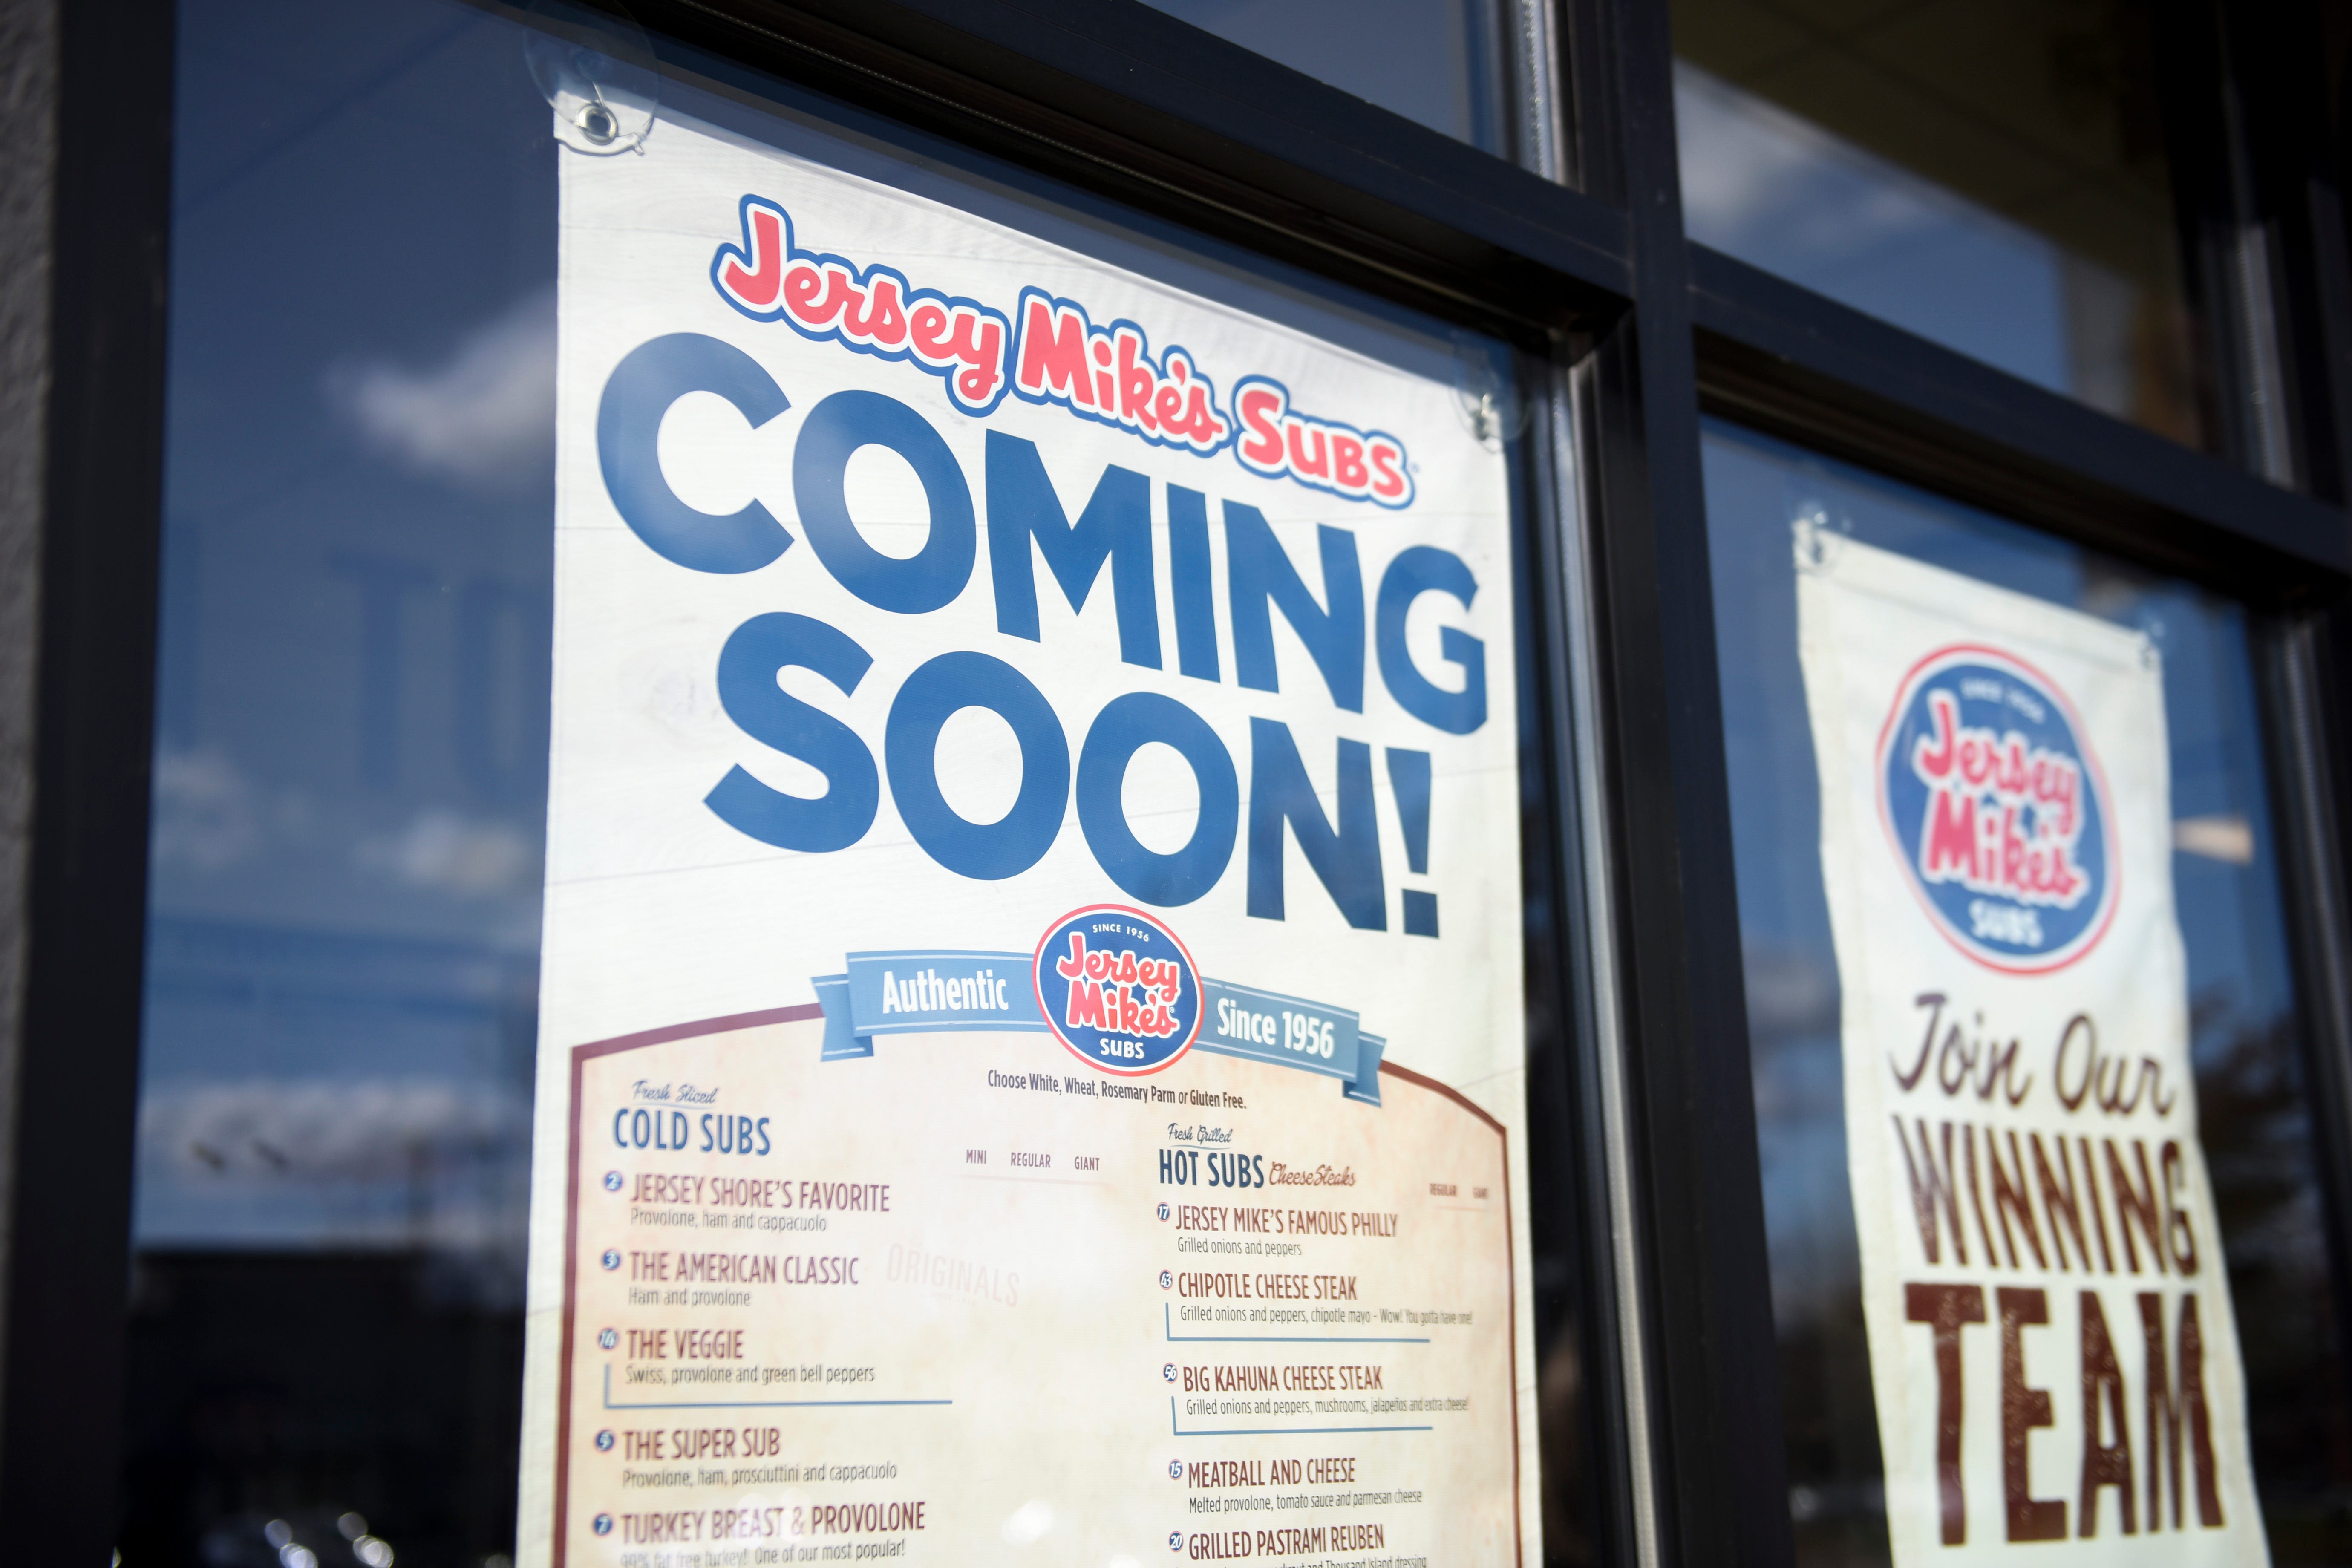 what time does jersey mike's open